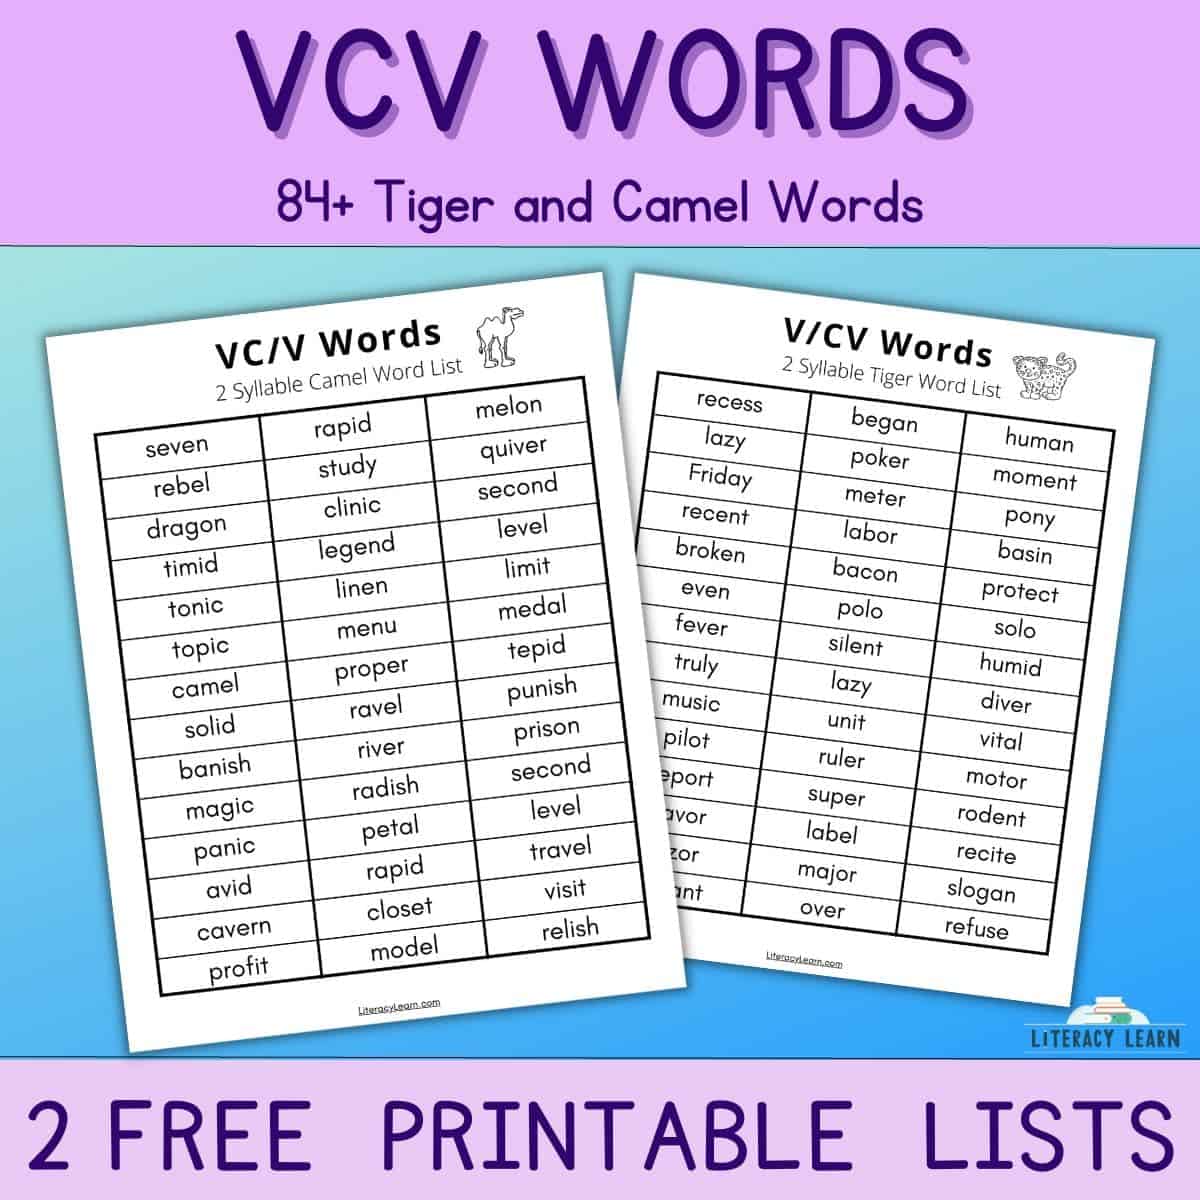 Two VCV word lists, organized by Tiger and Camel words, displayed on blue background.